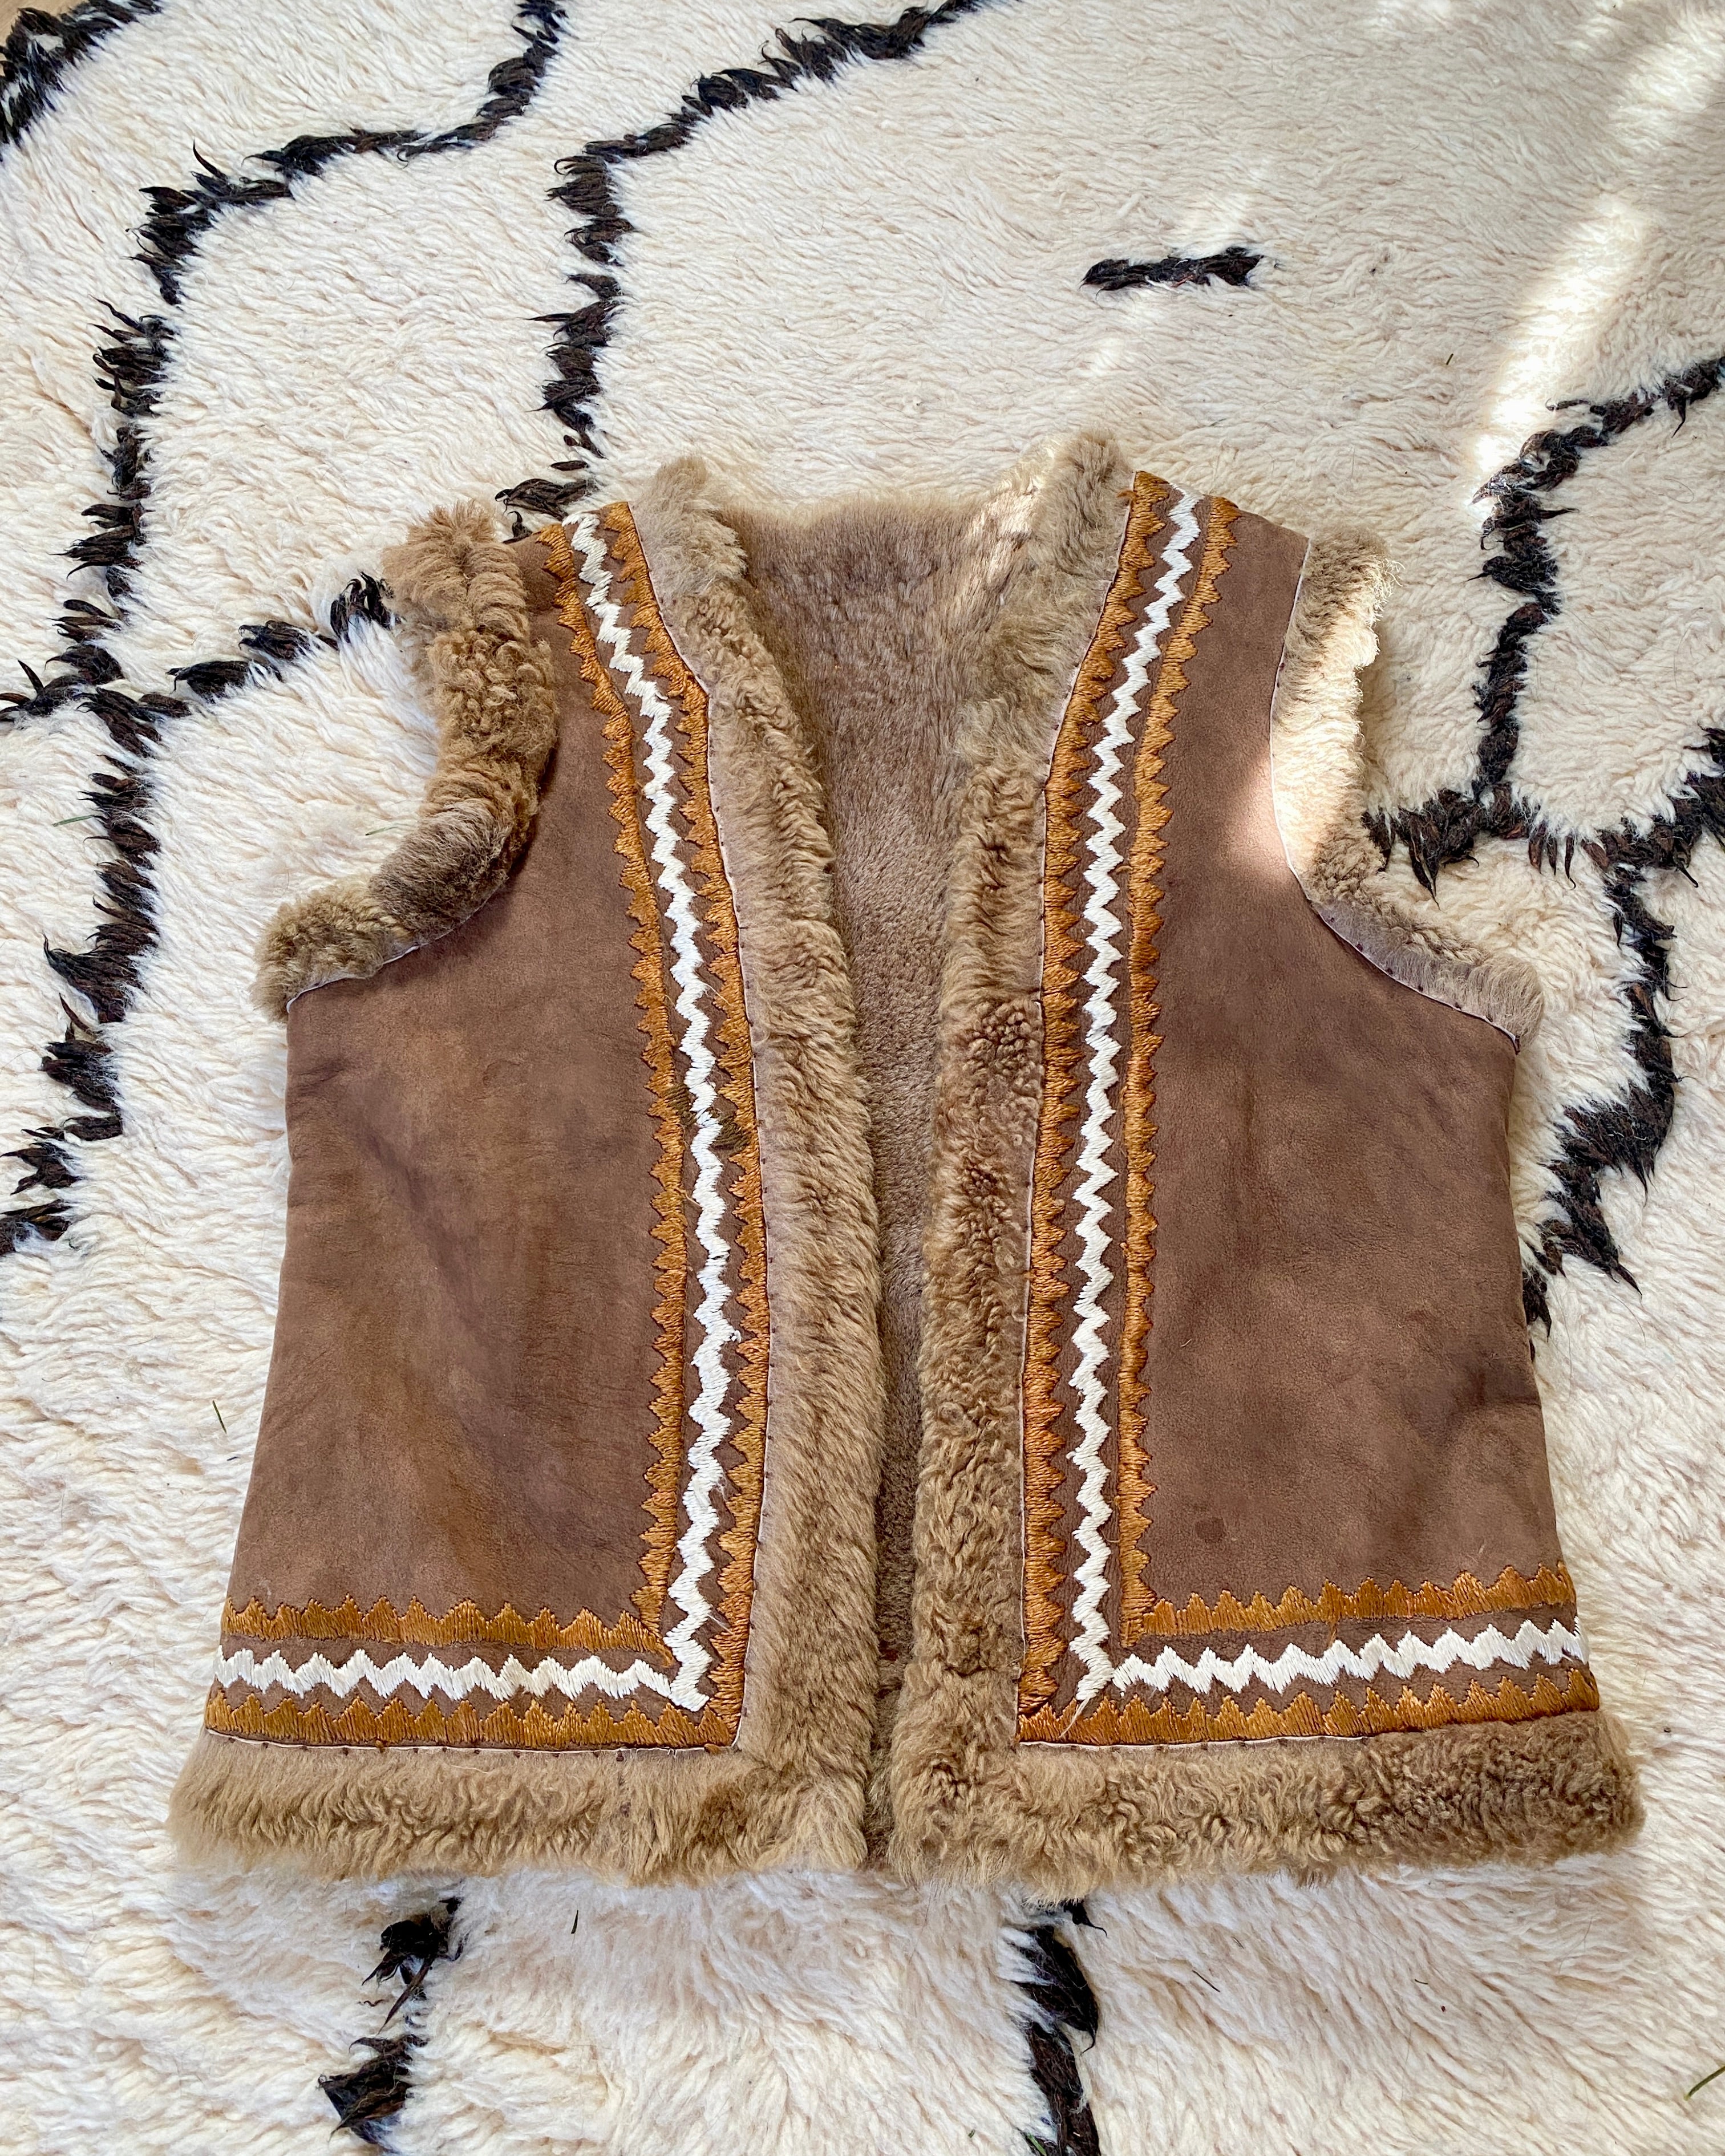 Vintage 1960s Afghan Penny Lane Shearling Suede Brown Vest with Silk Embroidery Janis Joplin Style Small or Medium